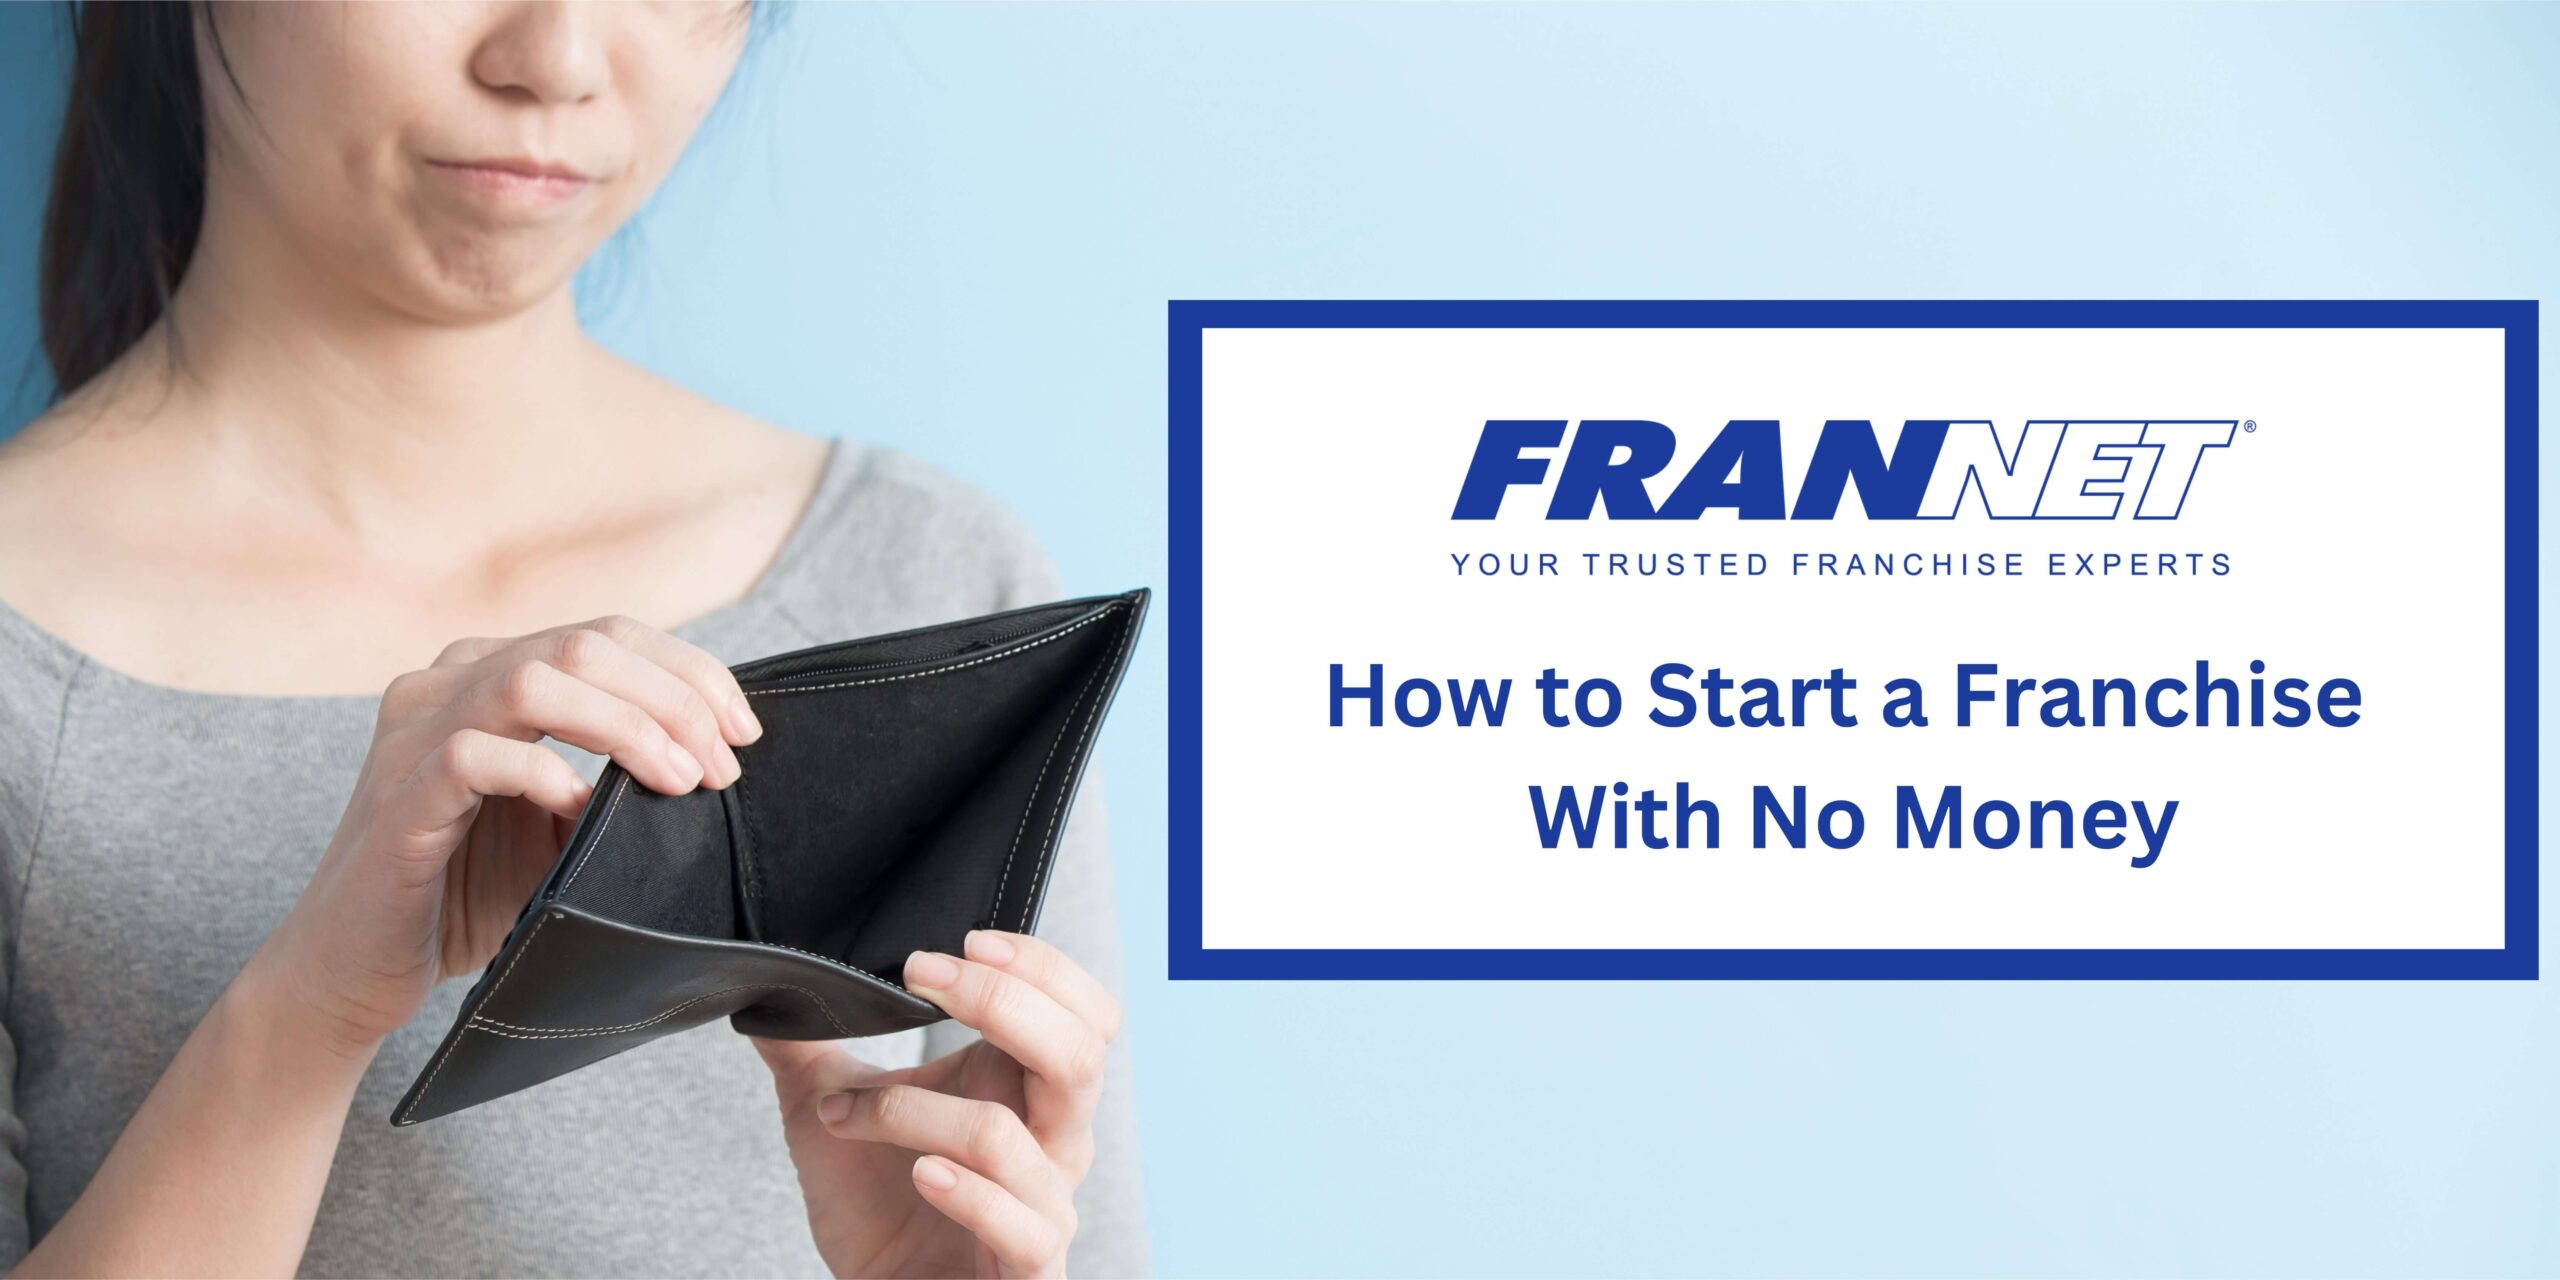 How to Start a Franchise With No Money